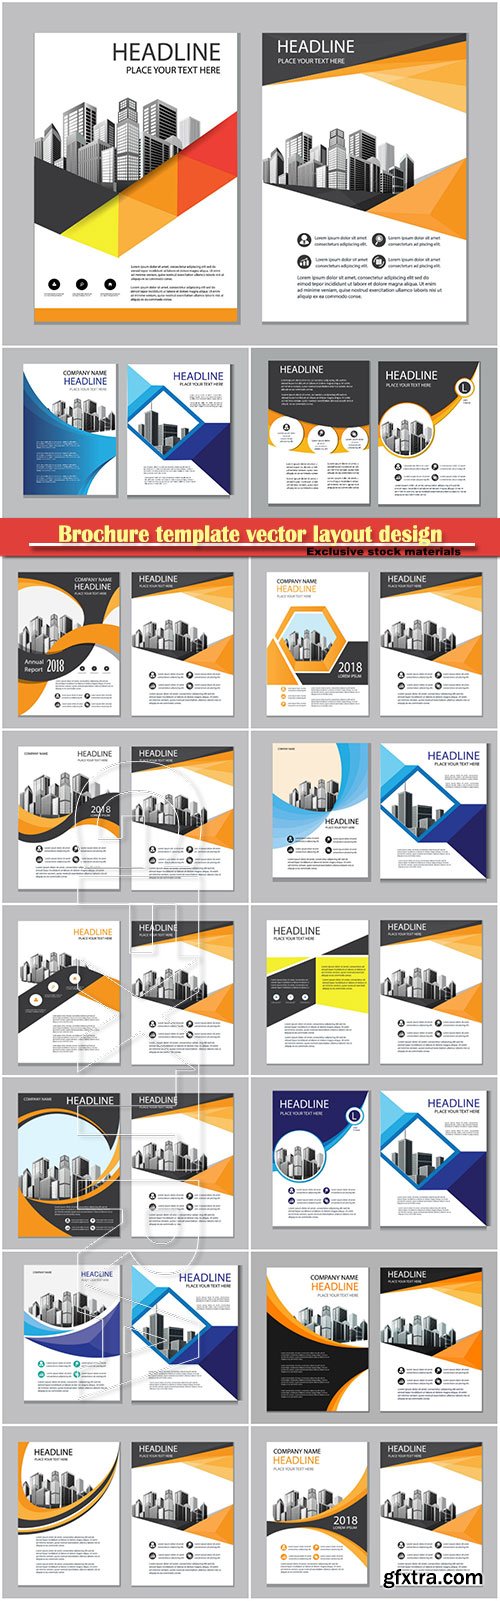 Brochure template vector layout design, corporate business annual report, magazine, flyer mockup # 135